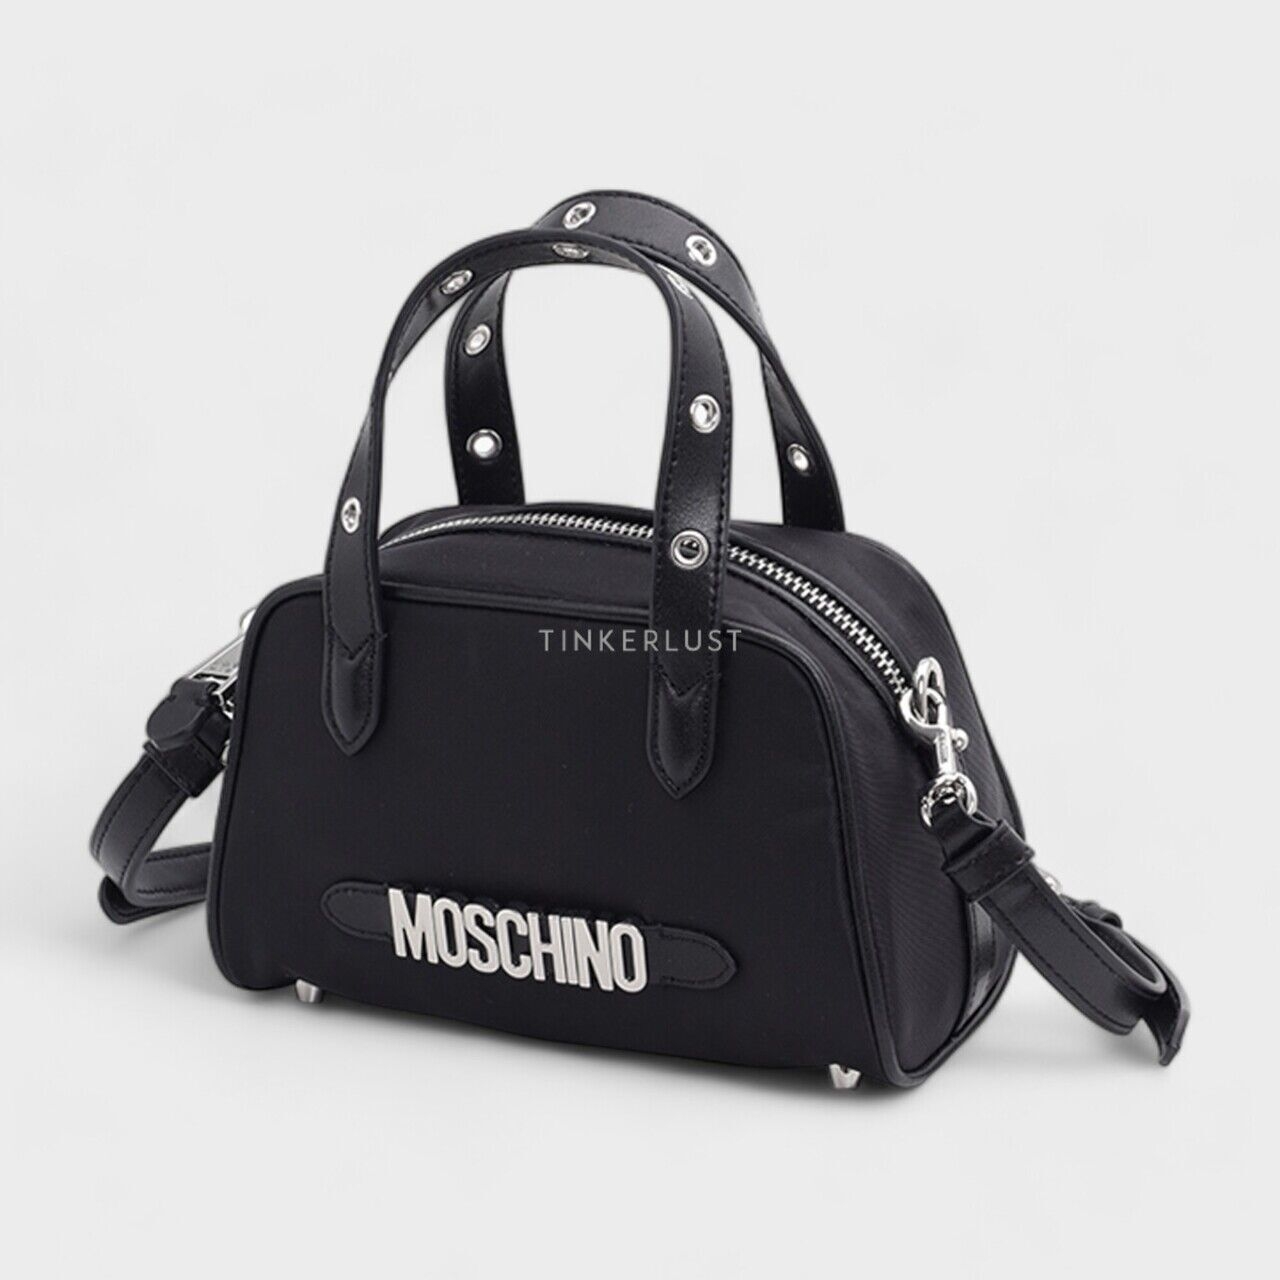 Moschino Logo Top Handle in Black SHW with Metal Detail Satchel Bag